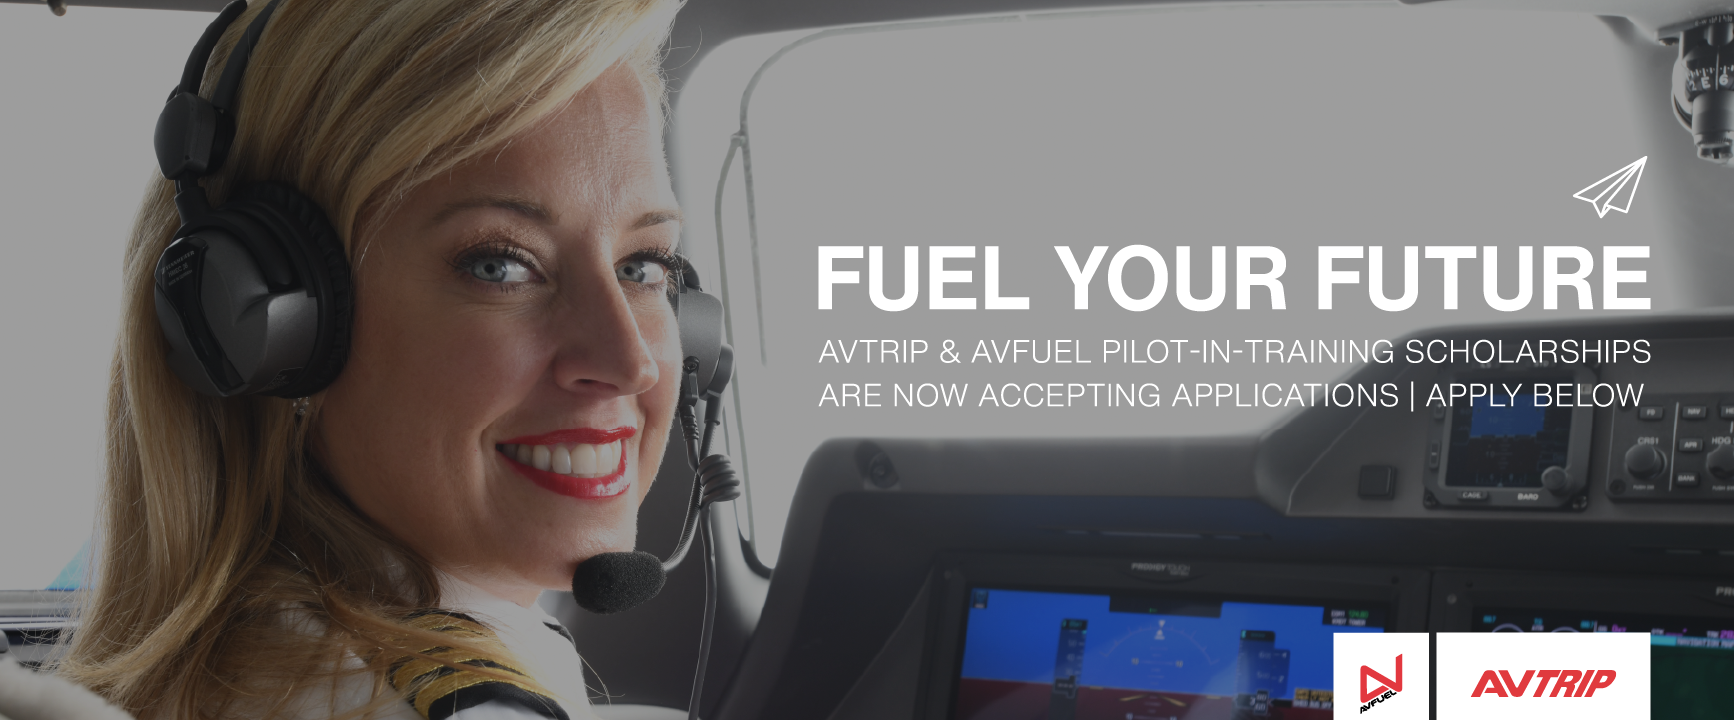 avfuel scholarships now accepting apps